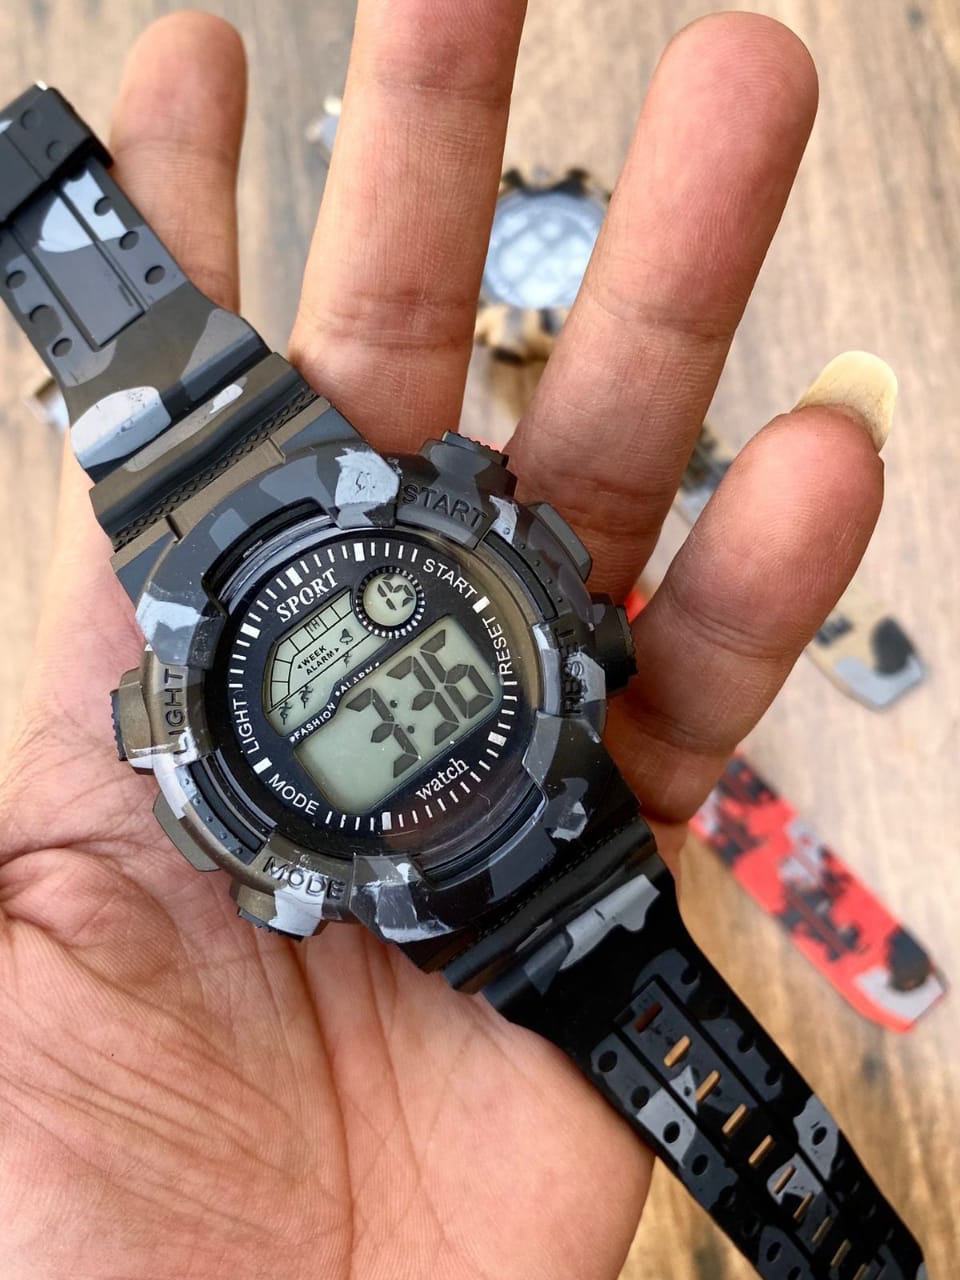 Details View - Sports Watches photos - reseller,reseller marketplace,advetising your products,reseller bazzar,resellerbazzar.in,india's classified site,Sports Watches , Sports Watches in rajkot , Sports Watches in gujrat ,buy Sports Watches online , Sports Watches in Ahmedabad 